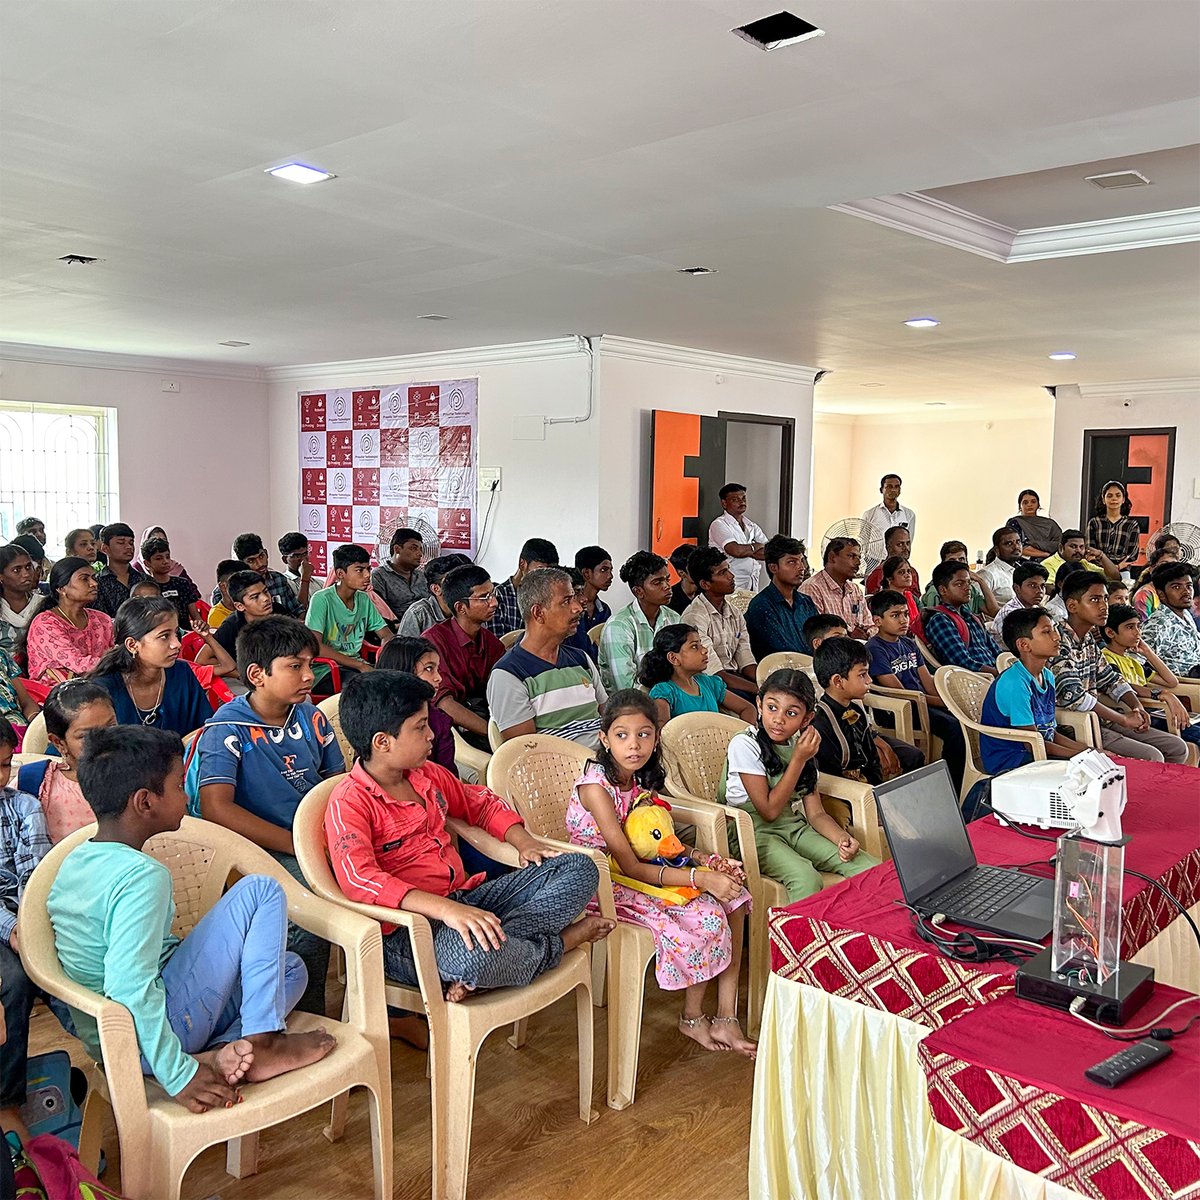 #Trichy! Huge response for our 1st ever Robotics, AI & Satellite workshop! Students & parents - we loved your enthusiasm!  Hands-on activities, robot interaction, AI bots, team building & more!

Thank you for joining us!

#PropellerTechnologies #Workshop #TrichyLovesRobotics